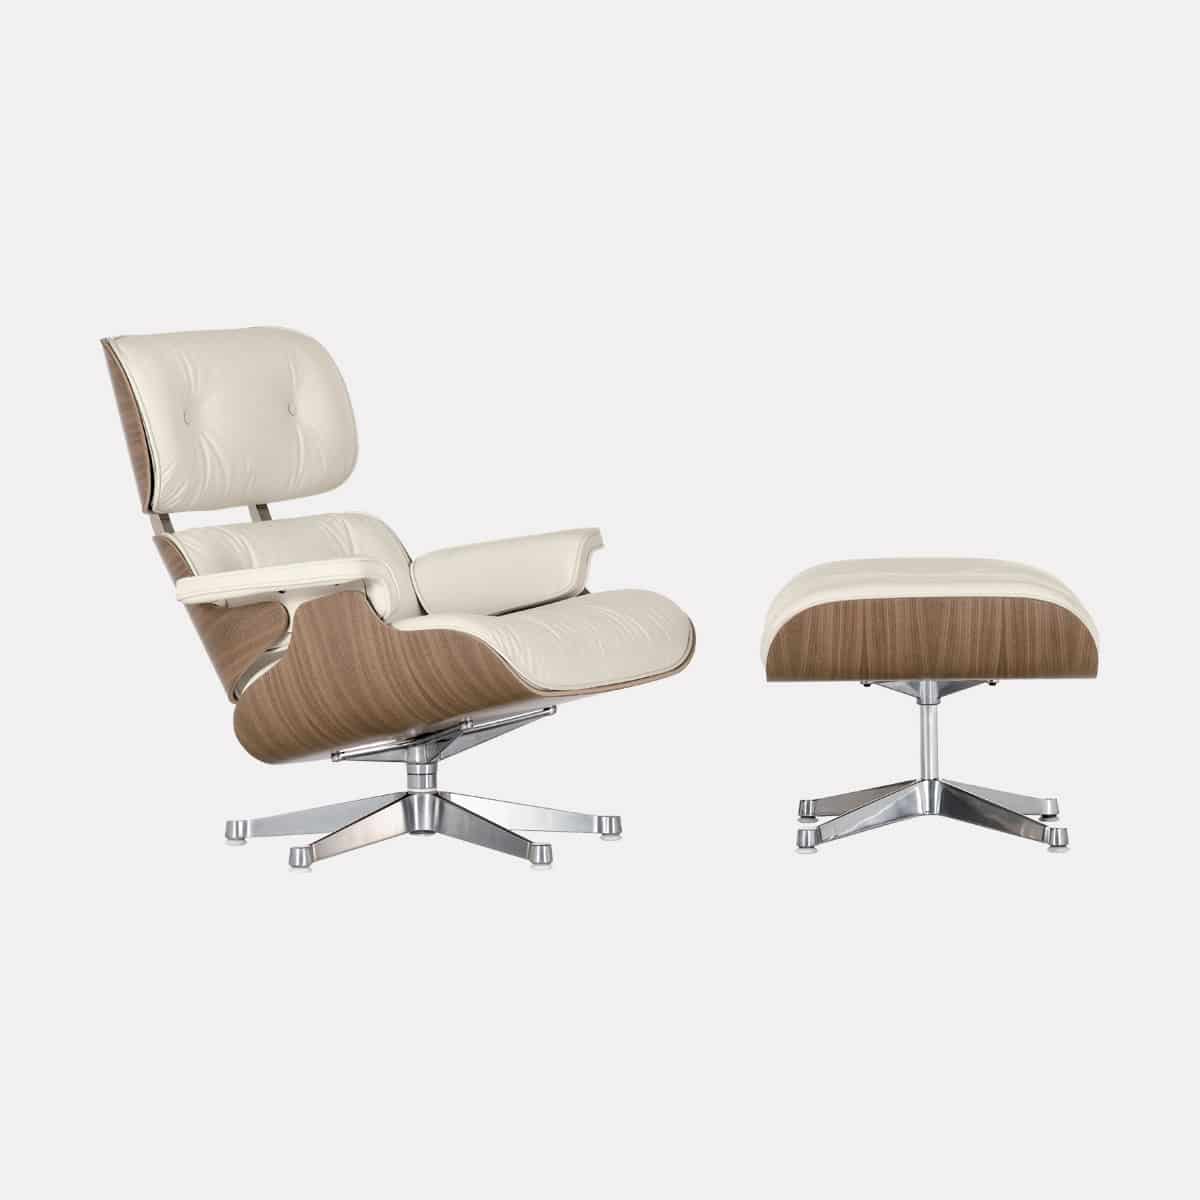 vitra-charles-ray-eames-lounge-chair-ottoman-walnoot-wit-leder-natural-snow-aluminium-gepolijst-001shop